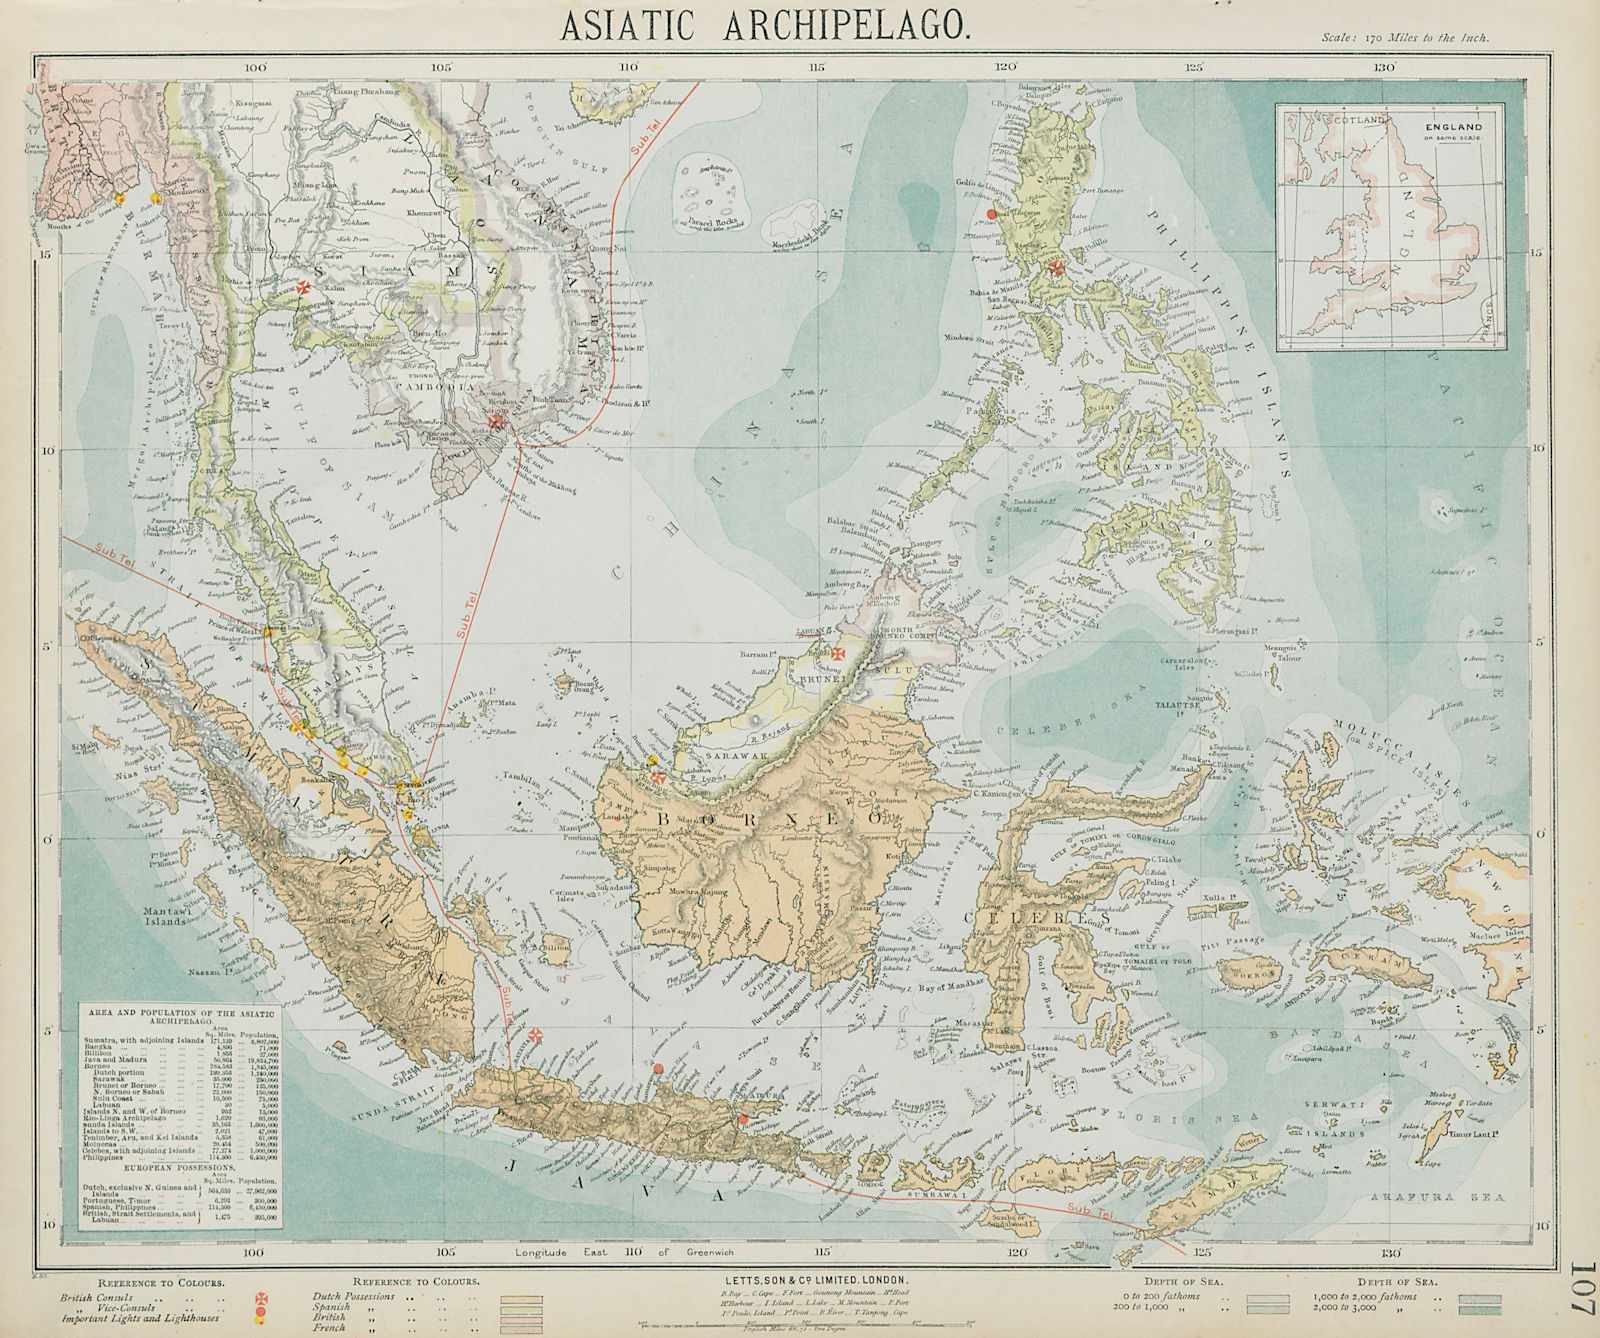 Associate Product Asiatic Archipelago. Dutch East Indies. Indochina Philippines. LETTS 1884 map